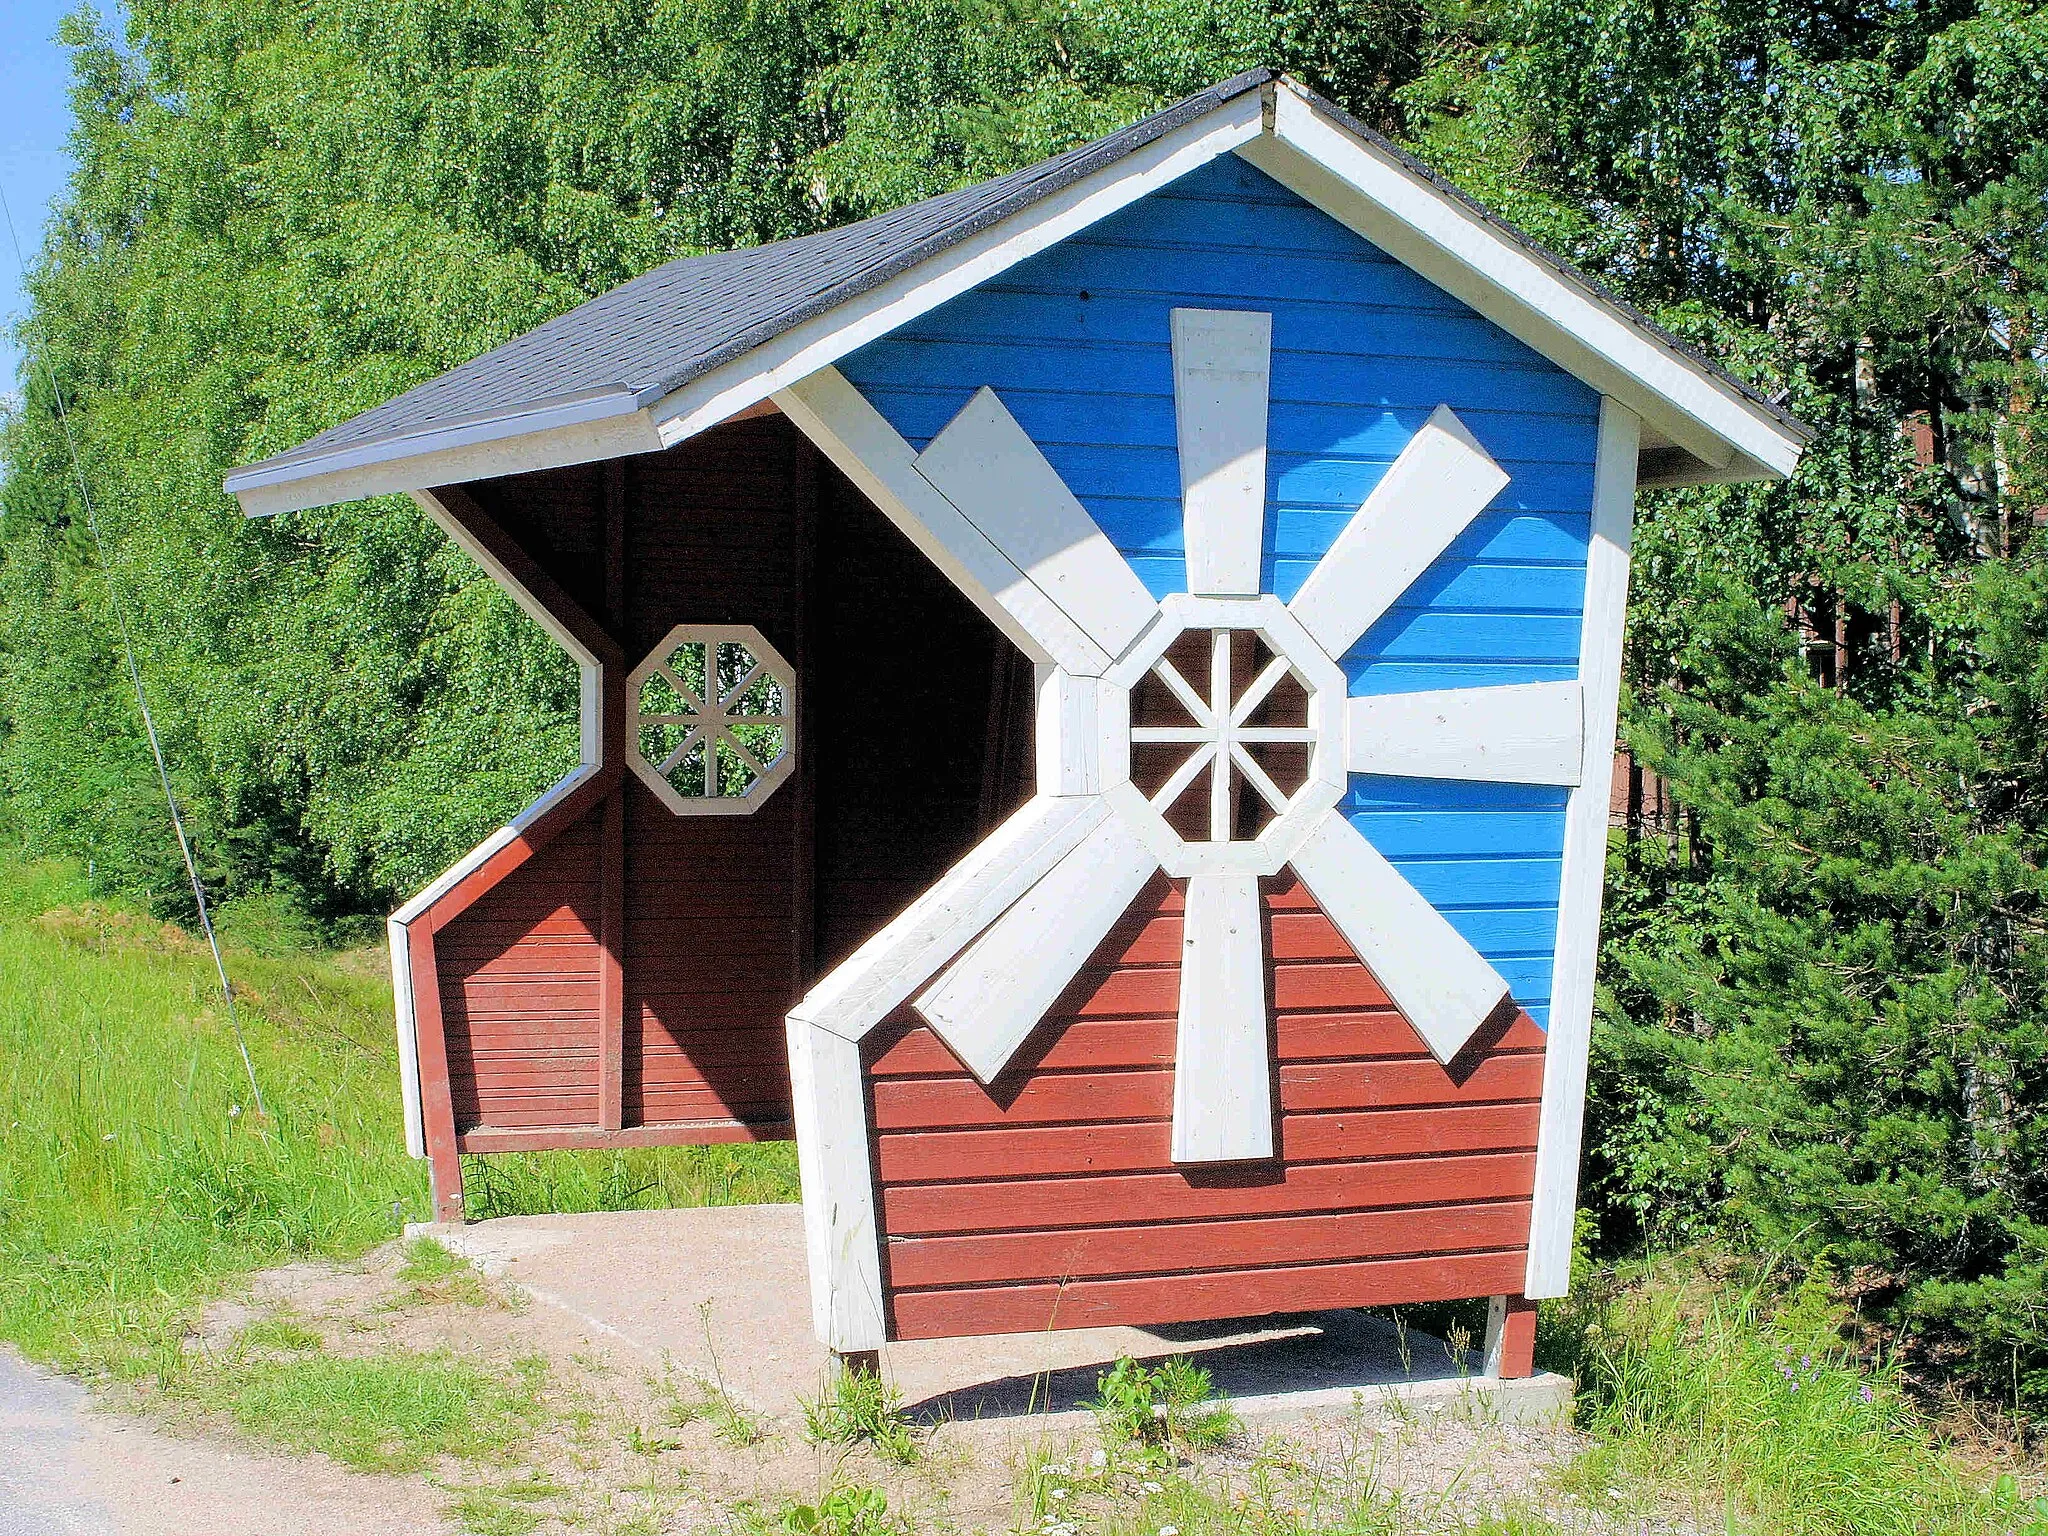 Photo showing: Bus stop shelter in Jalasjarvi, Finland Construction: A wooden bus stop shelter decorated with a wind mill theme. Wind mills are symbols of Jalasjarvi. Geographical position: N 62°23.211' E 022°48.214', Tampereentie 1122, Koskue, municipality of Jalasjarvi Photograph: Canon EOS 350D, Olli-Jukka Paloneva, 3rd July, 2007, paloneva@phnet.fi References: The municipality of Jalasjarvi (Finnish translittaration Jalasjärvi) http://www.jalasjarvi.fi